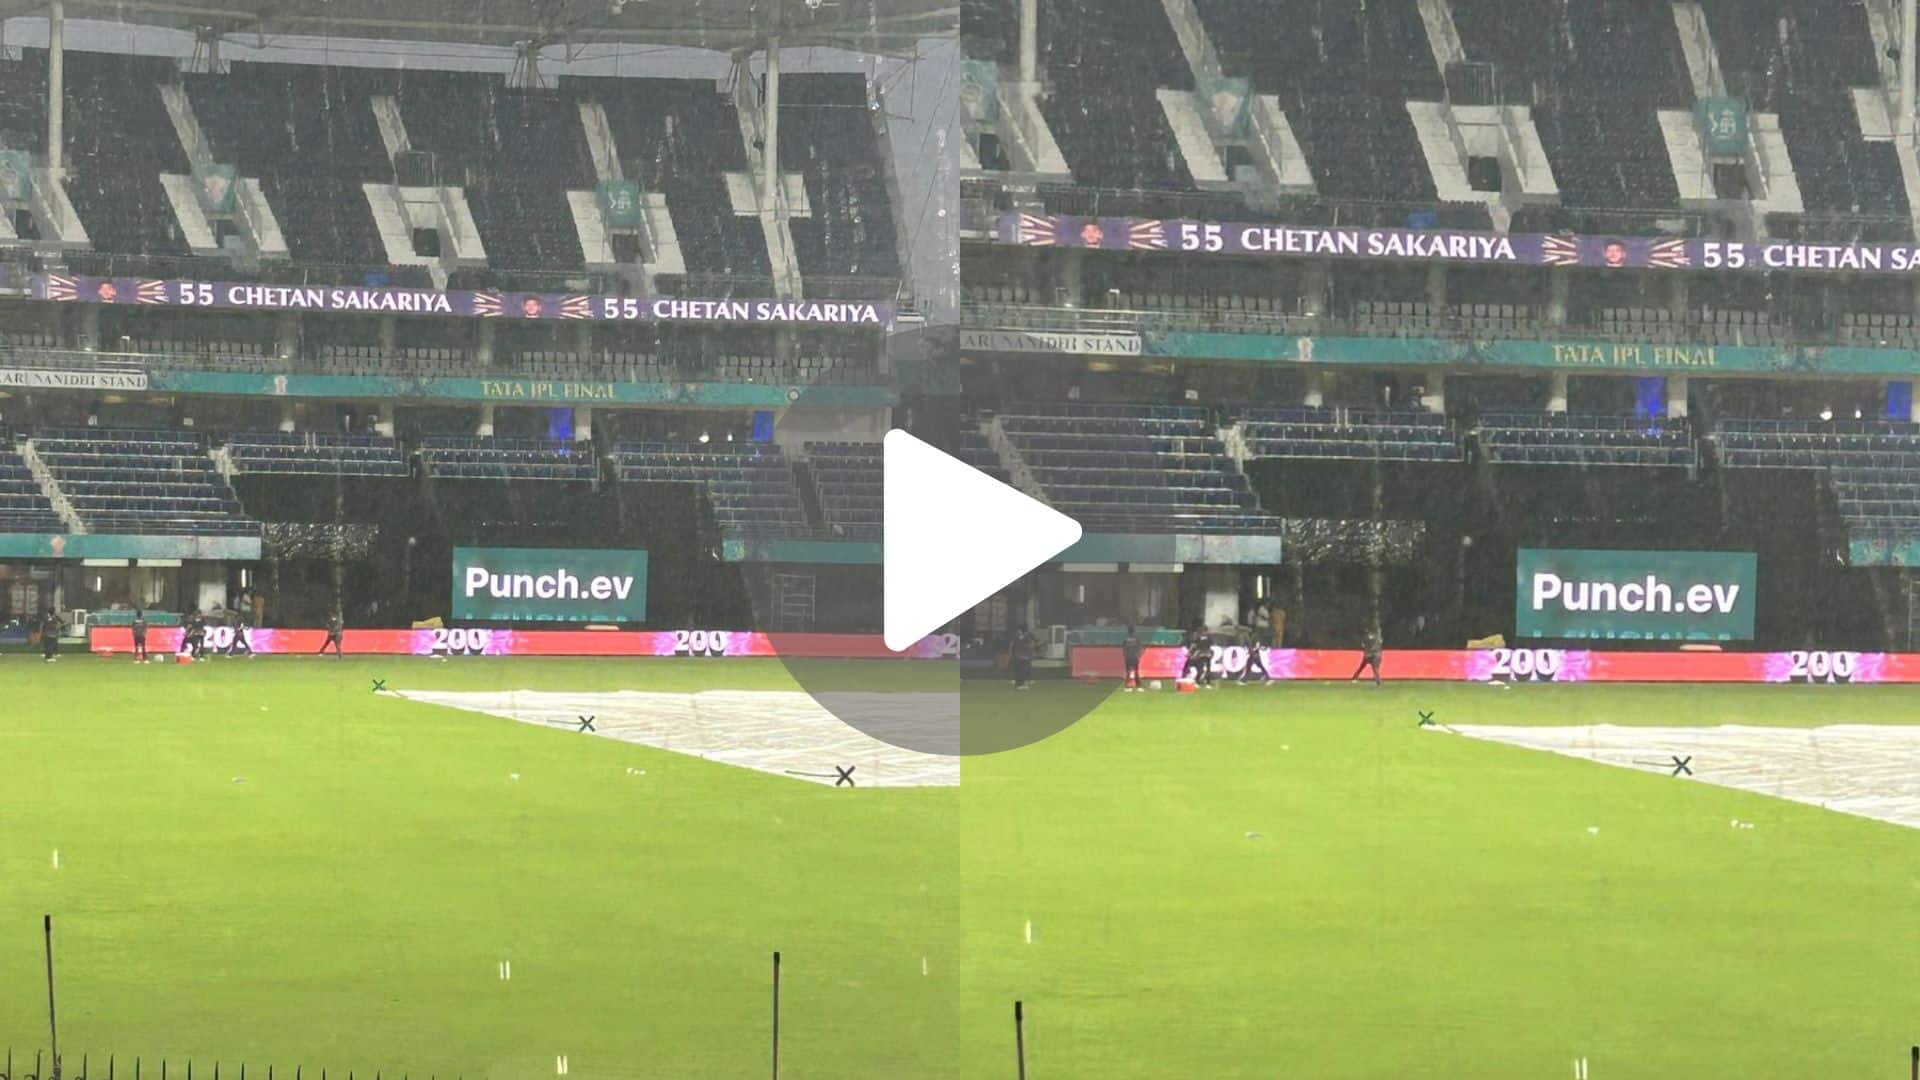 [Watch] Chennai Weather Today | Will SRH vs KKR IPL Final Be Abandoned Due To Rain?